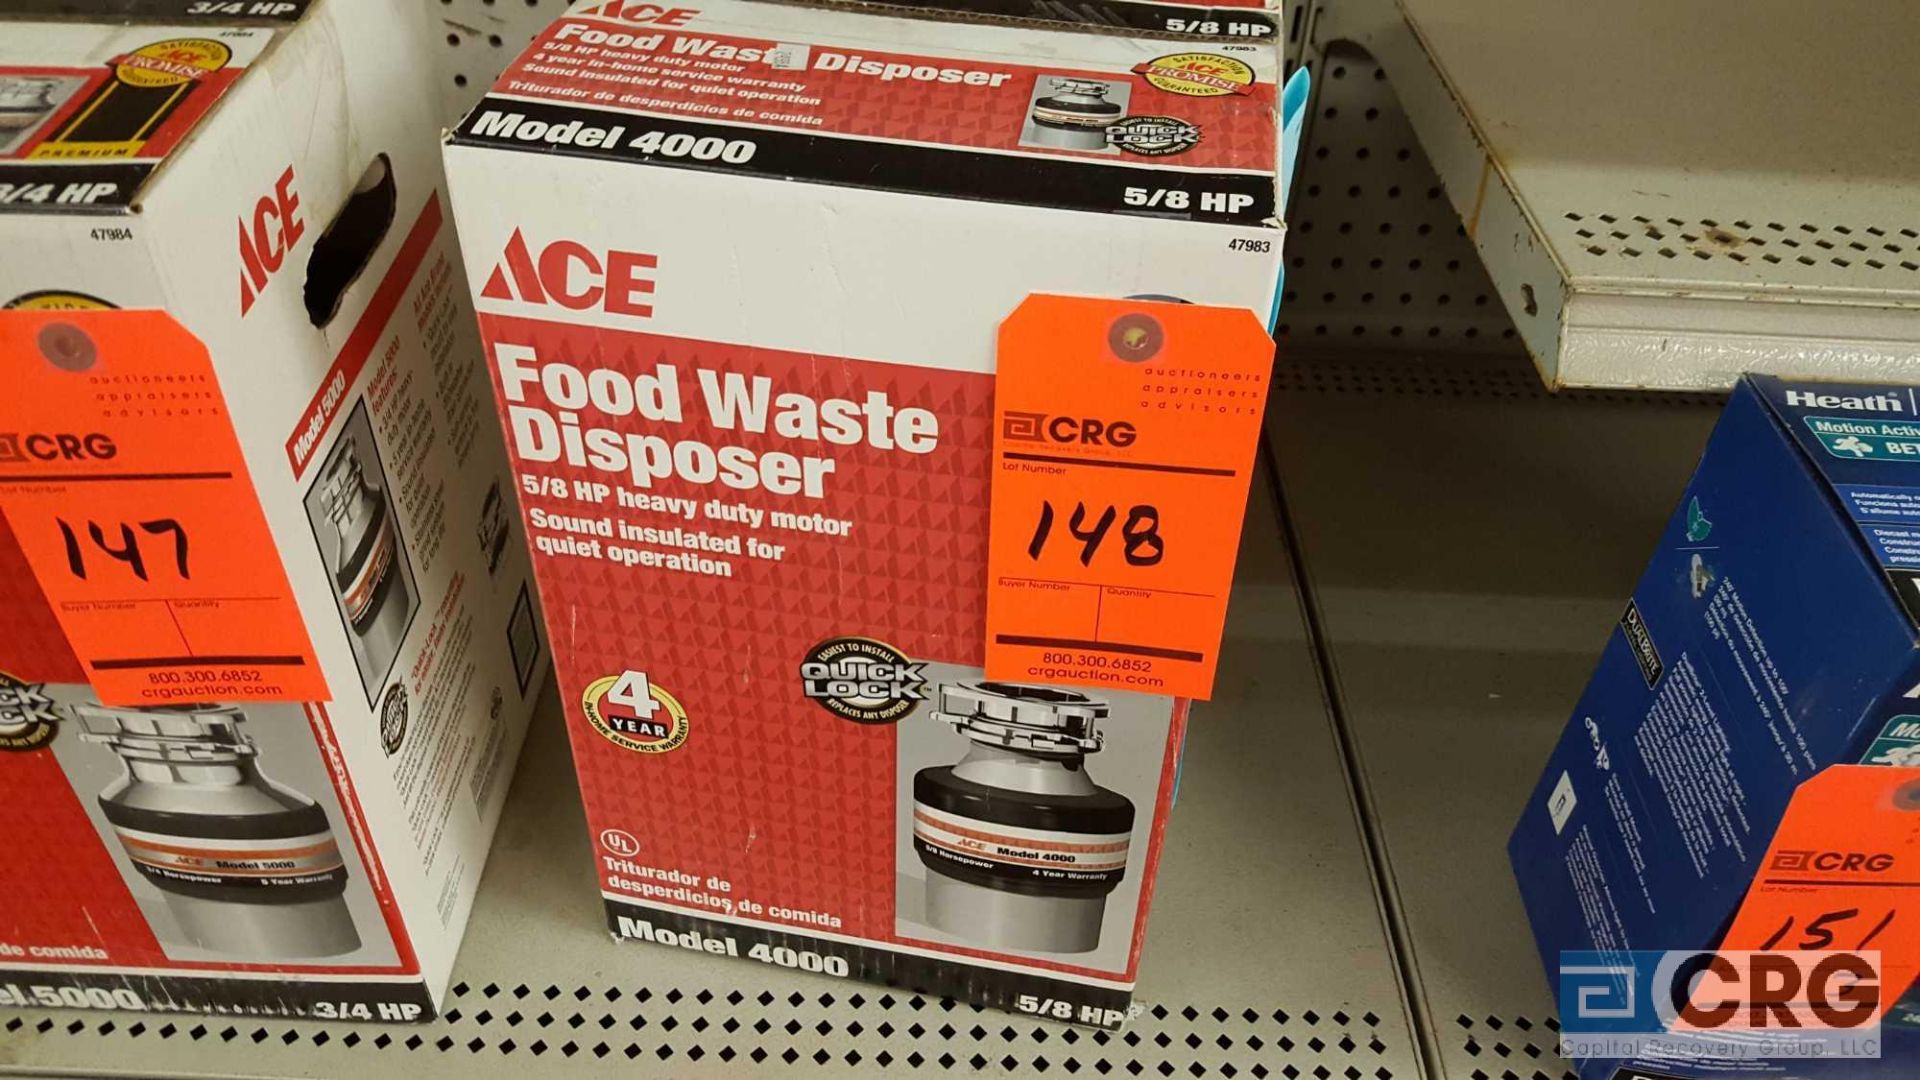 Ace 4000 food waste disposer, 5/8 HP, NEW